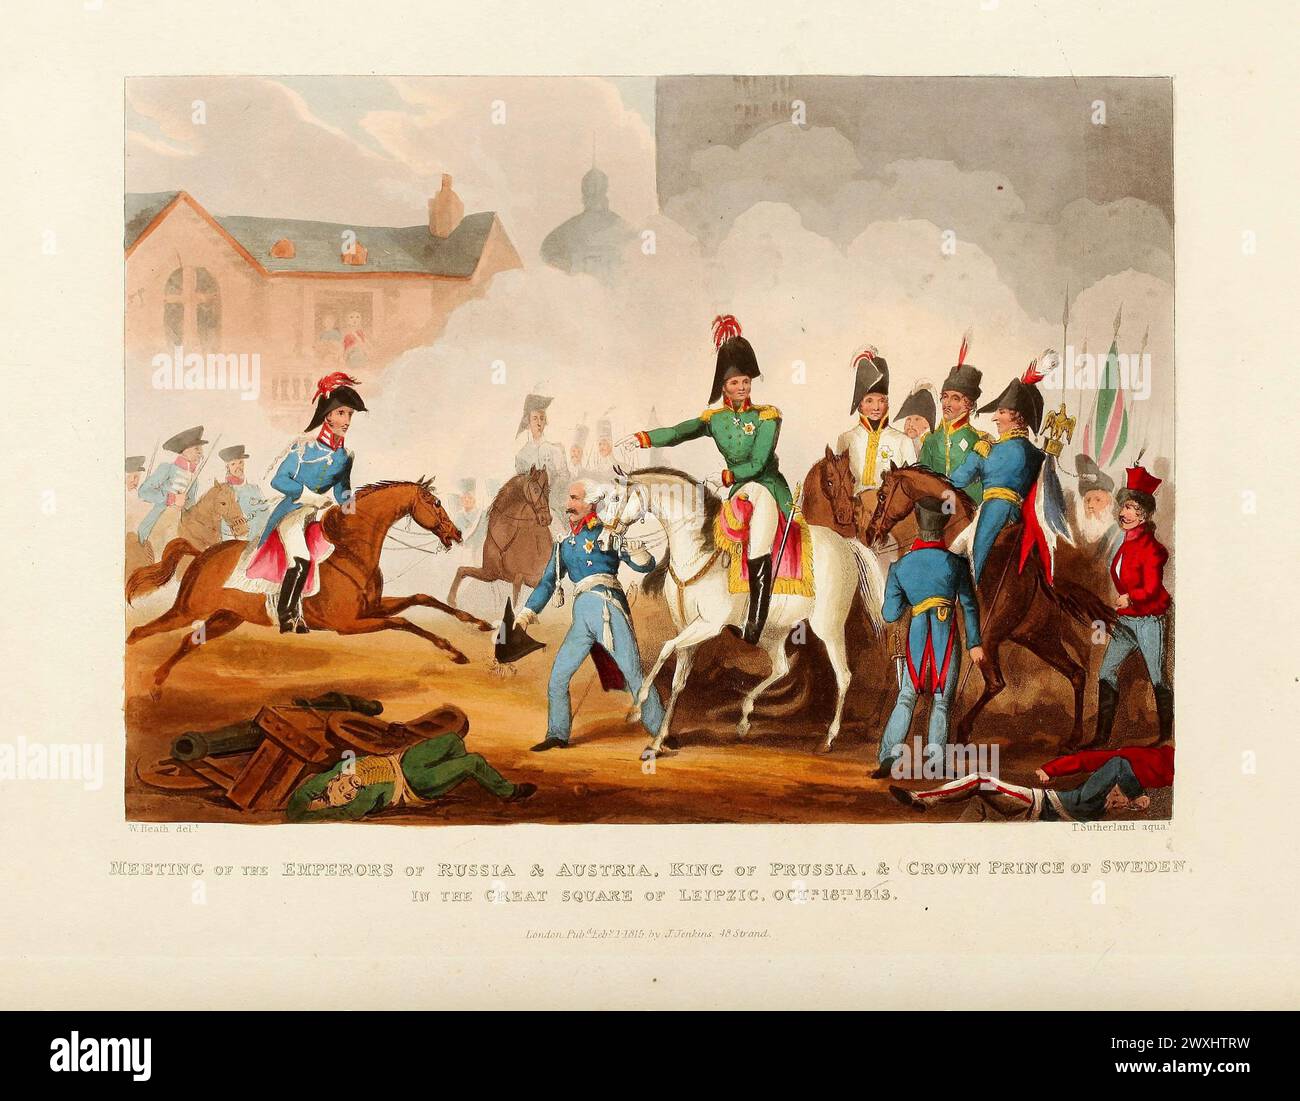 Meeting of the Emperors of Russia and Austria, King of Prussia, and Crown Prince of Sweden in the Great Square in Leipzic (now Leipzig), October 18, 1813. Vintage Coloured Aquatint, published by James Jenkins, 1815,  from  The martial achievements of Great Britain and her allies : from 1799 to 1815. Stock Photo